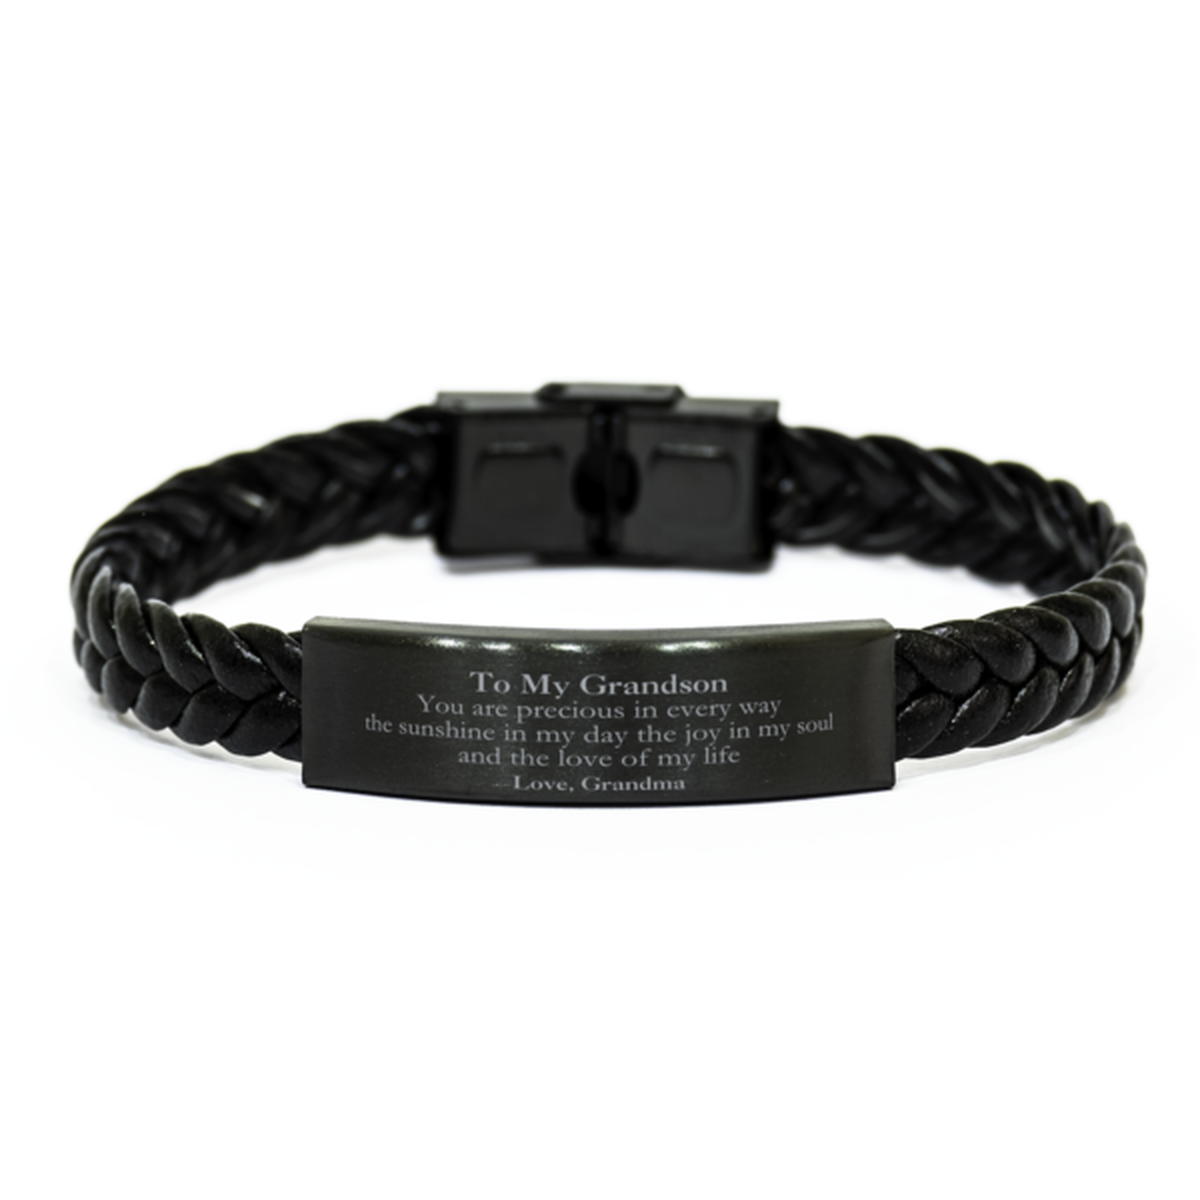 Graduation Gifts for Grandson Braided Leather Bracelet Present from Grandma, Christmas Grandson Birthday Gifts Grandson You are precious in every way the sunshine in my day. Love, Grandma